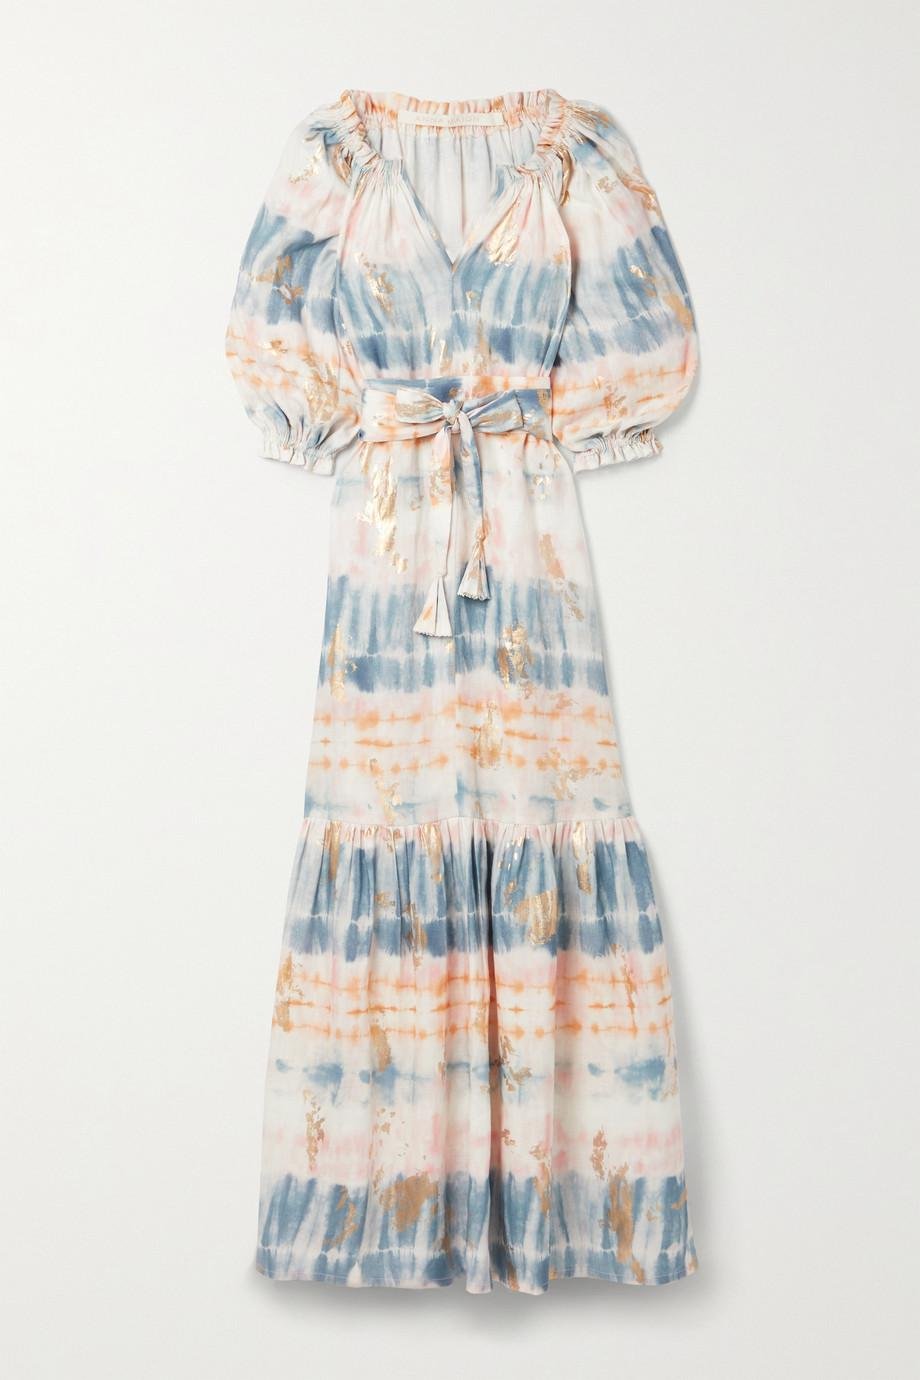 Belted metallic tie-dyed linen maxi dress by ANNA MASON